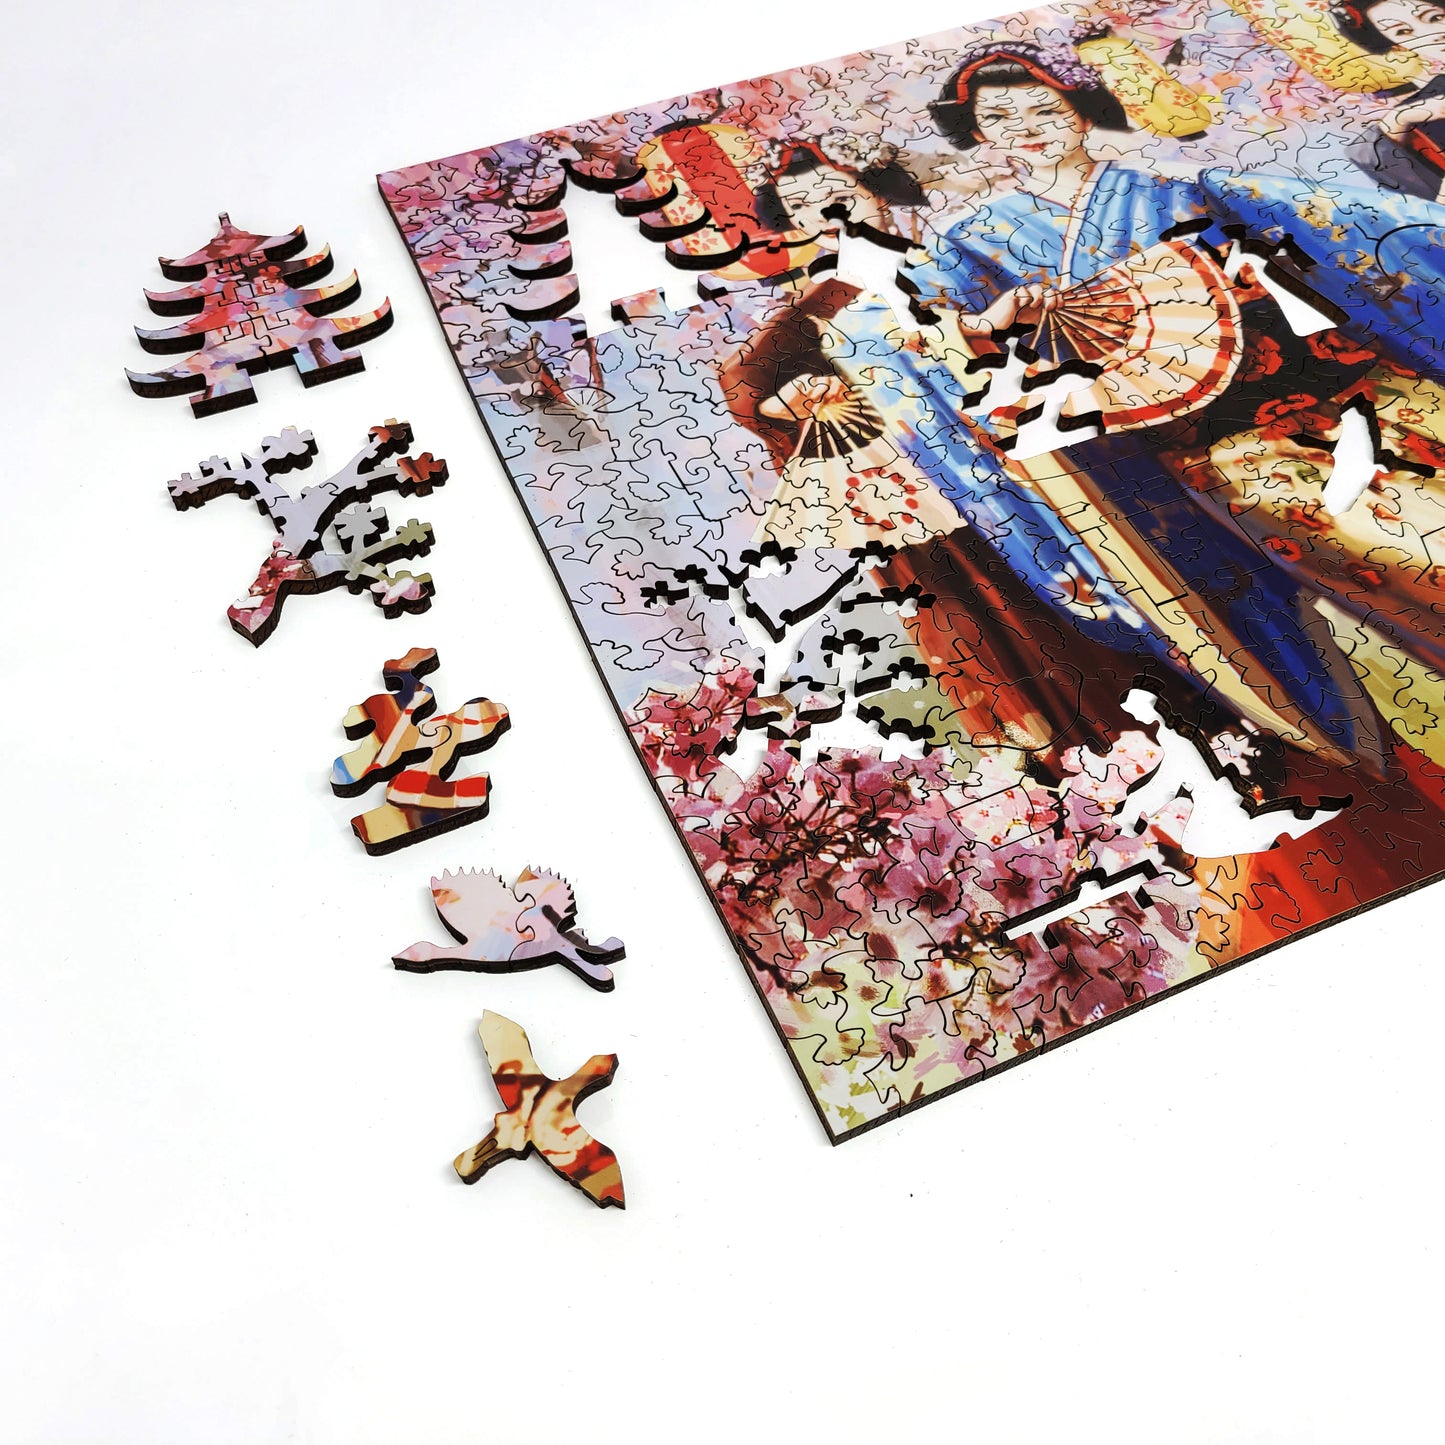 Wooden Jigsaw Puzzle with Uniquely Shaped Pieces for Adults - 437 Pieces - Sakura Blossom Festival